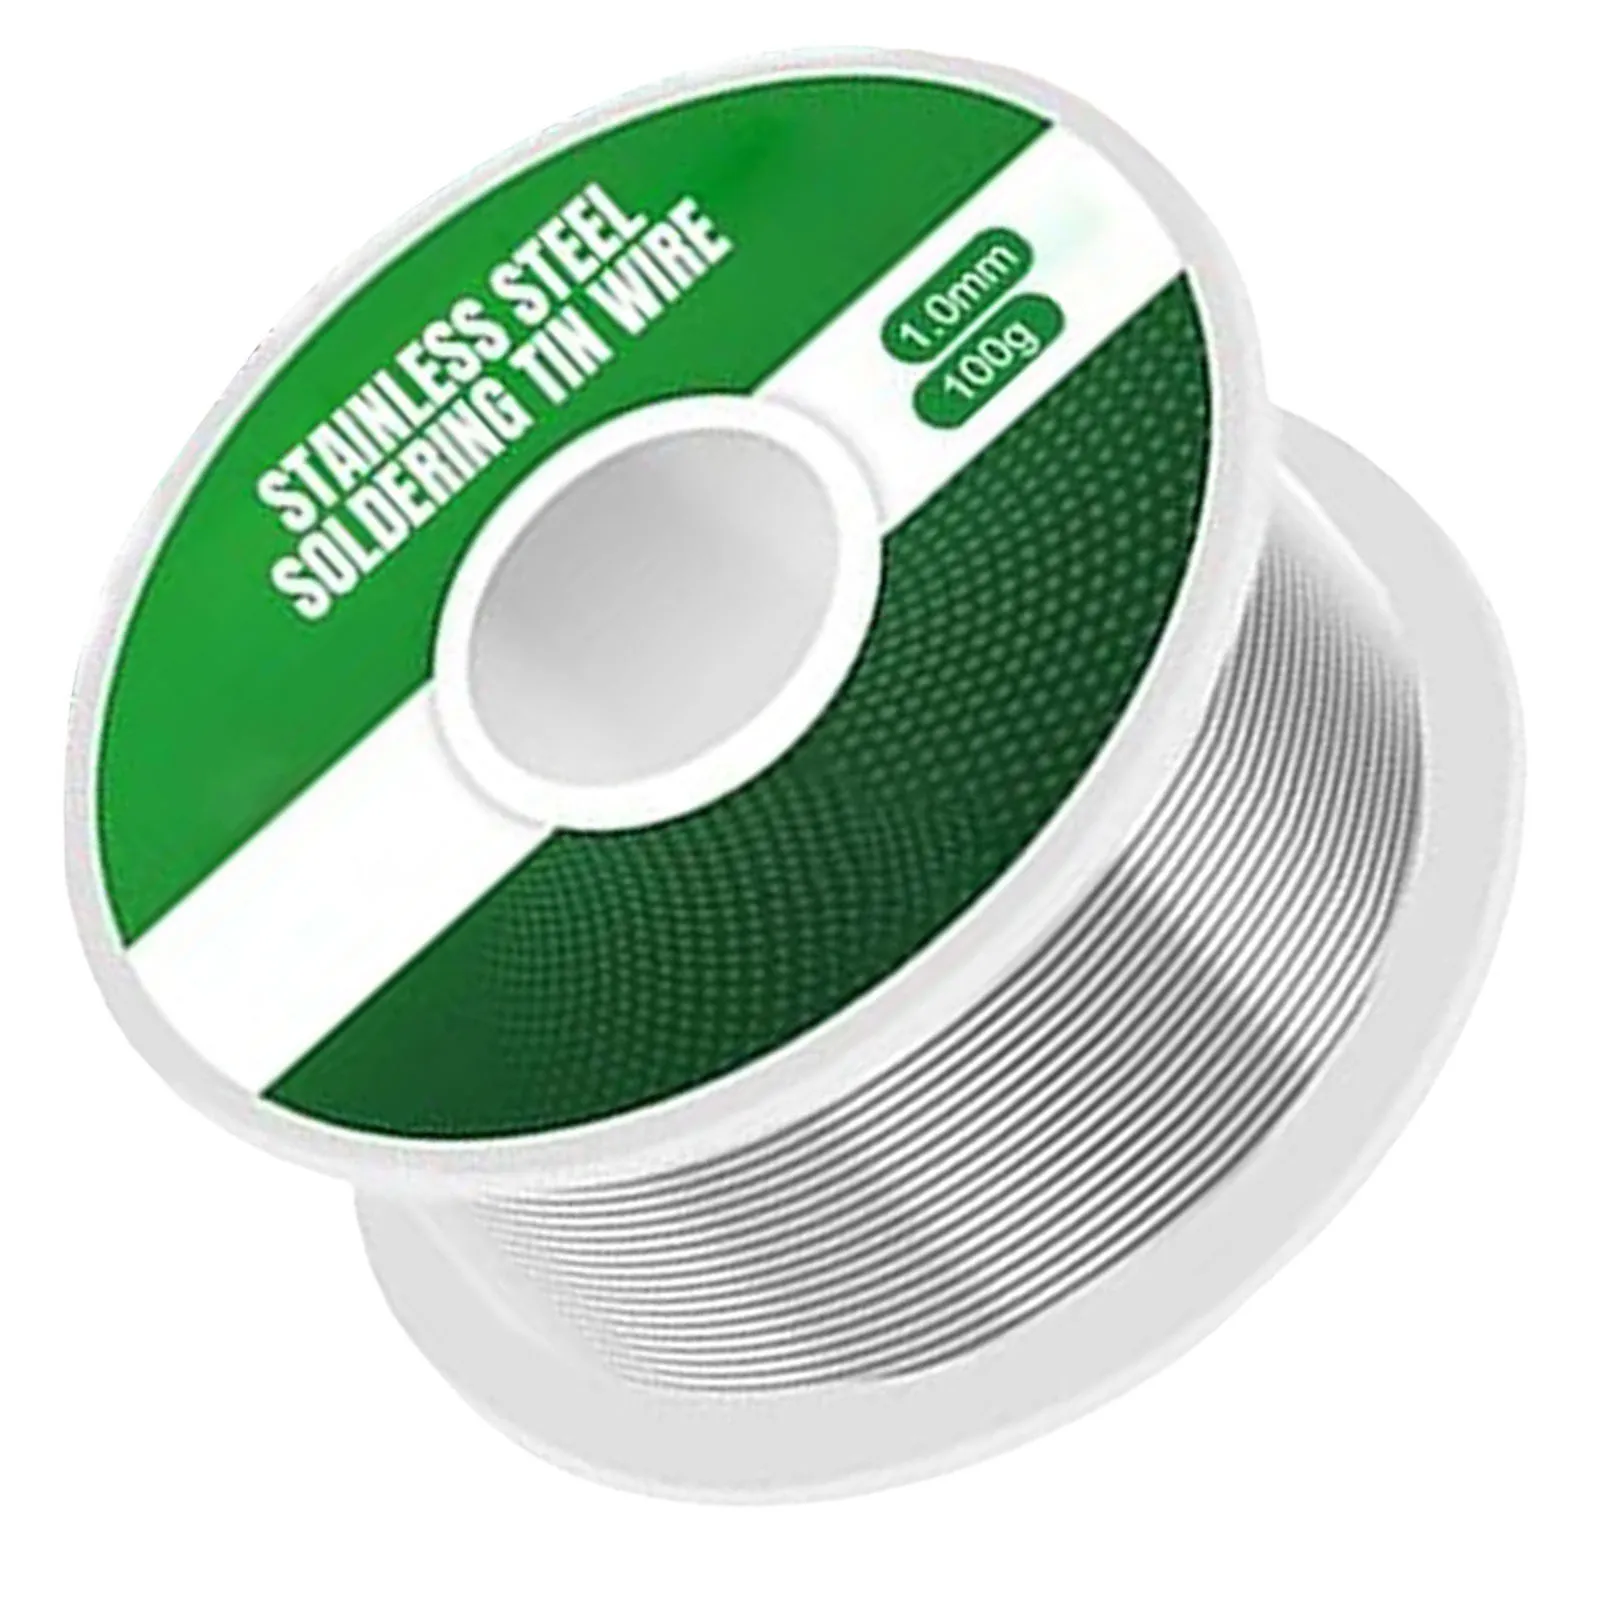 

Aluminum Stainless Steel Solder Wire Firm and Durable Tin Lead Core Solder Wire Suitable for Nickel-Plated Pipes